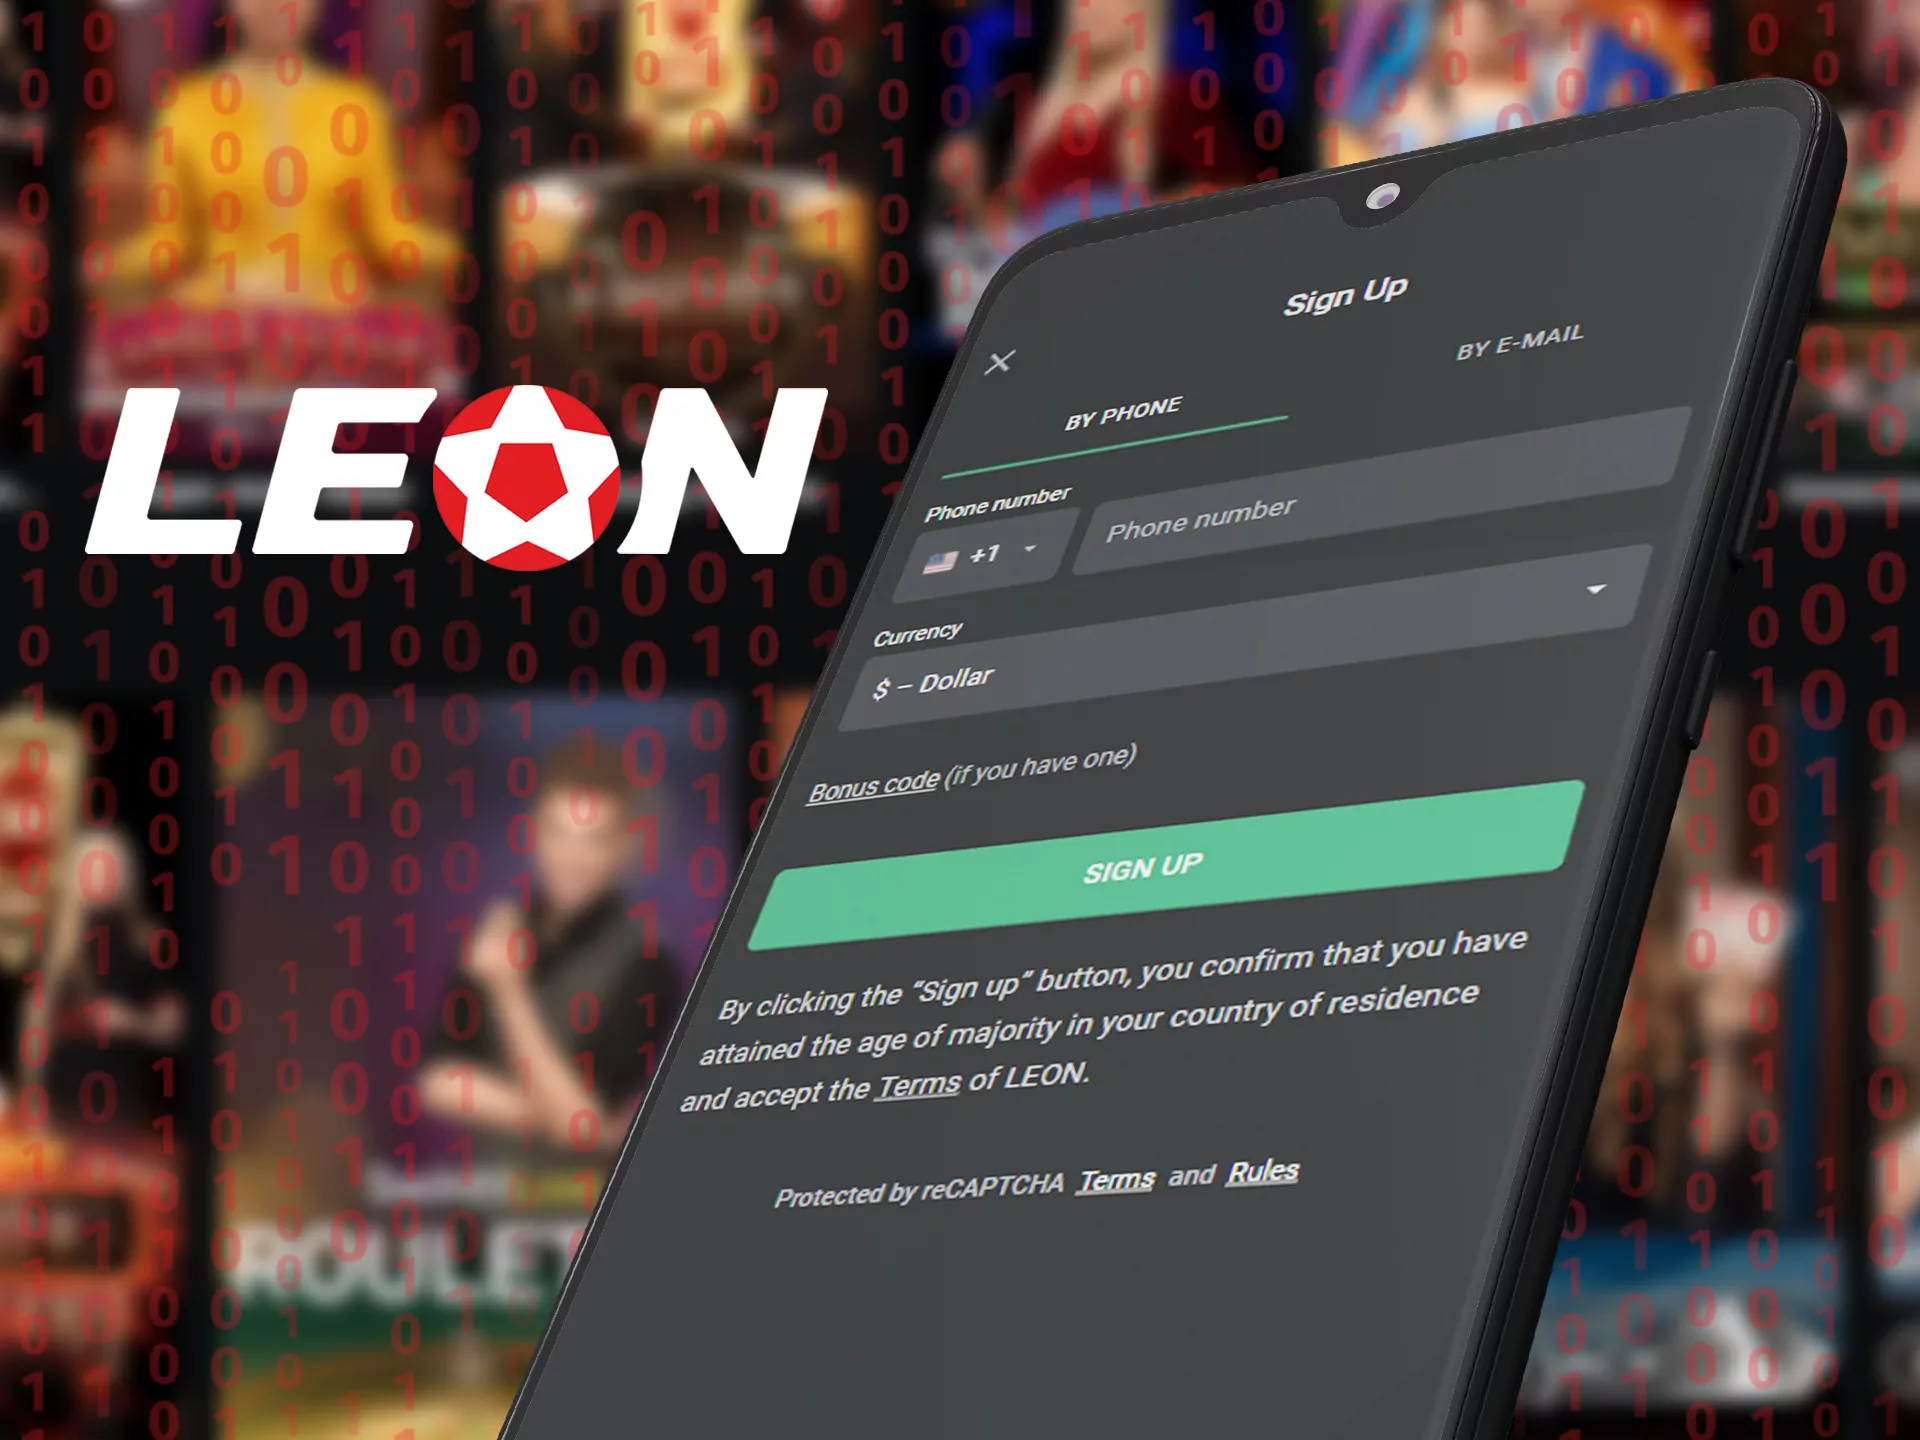 Use your username and password to log in to Leon bet.